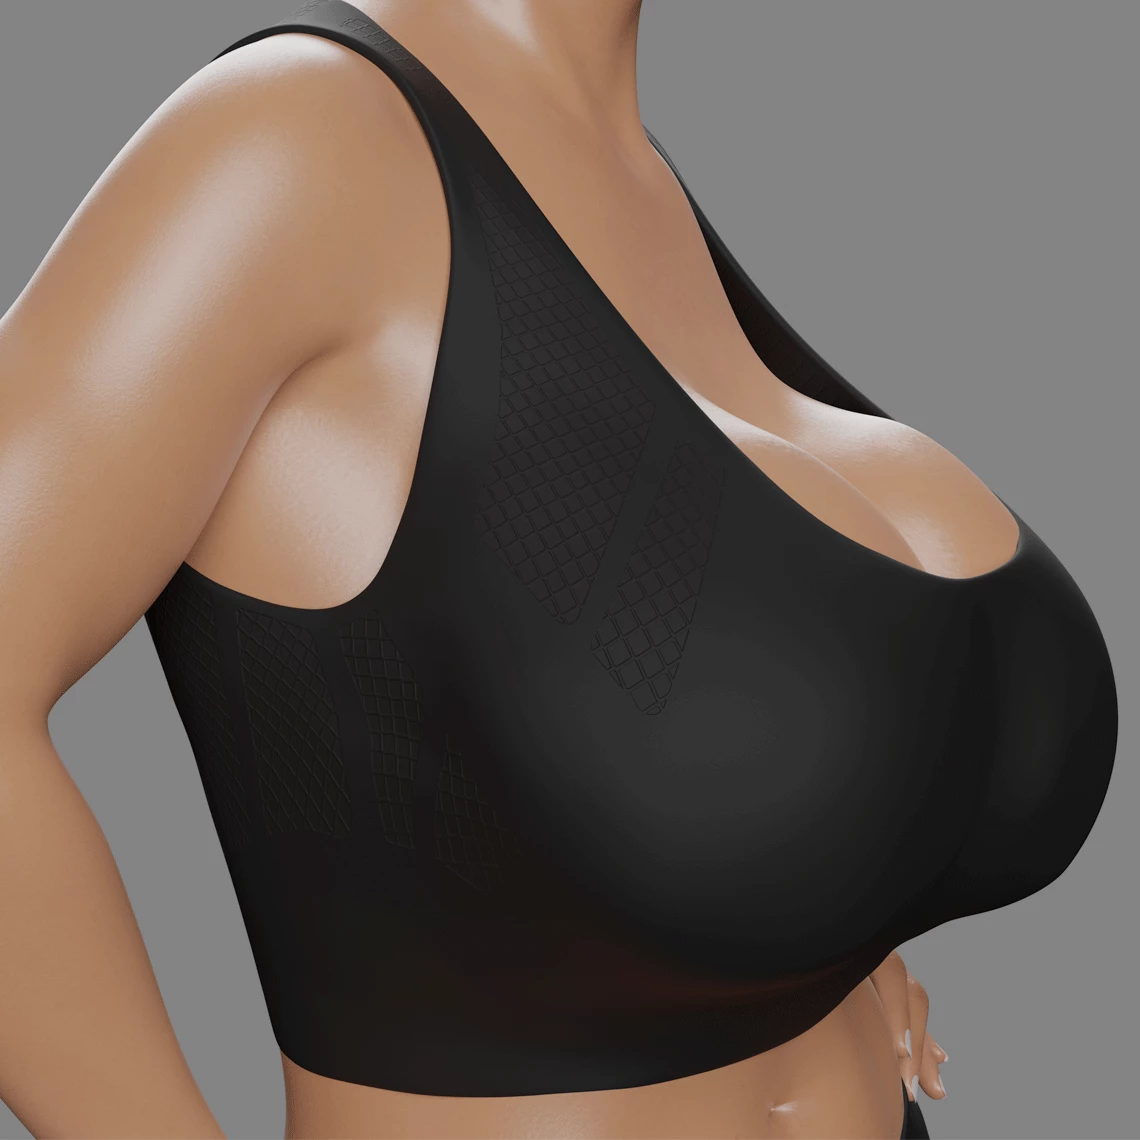 wonderful plastic surgery hospital in korea breast reduction surgery problems with huge breasts